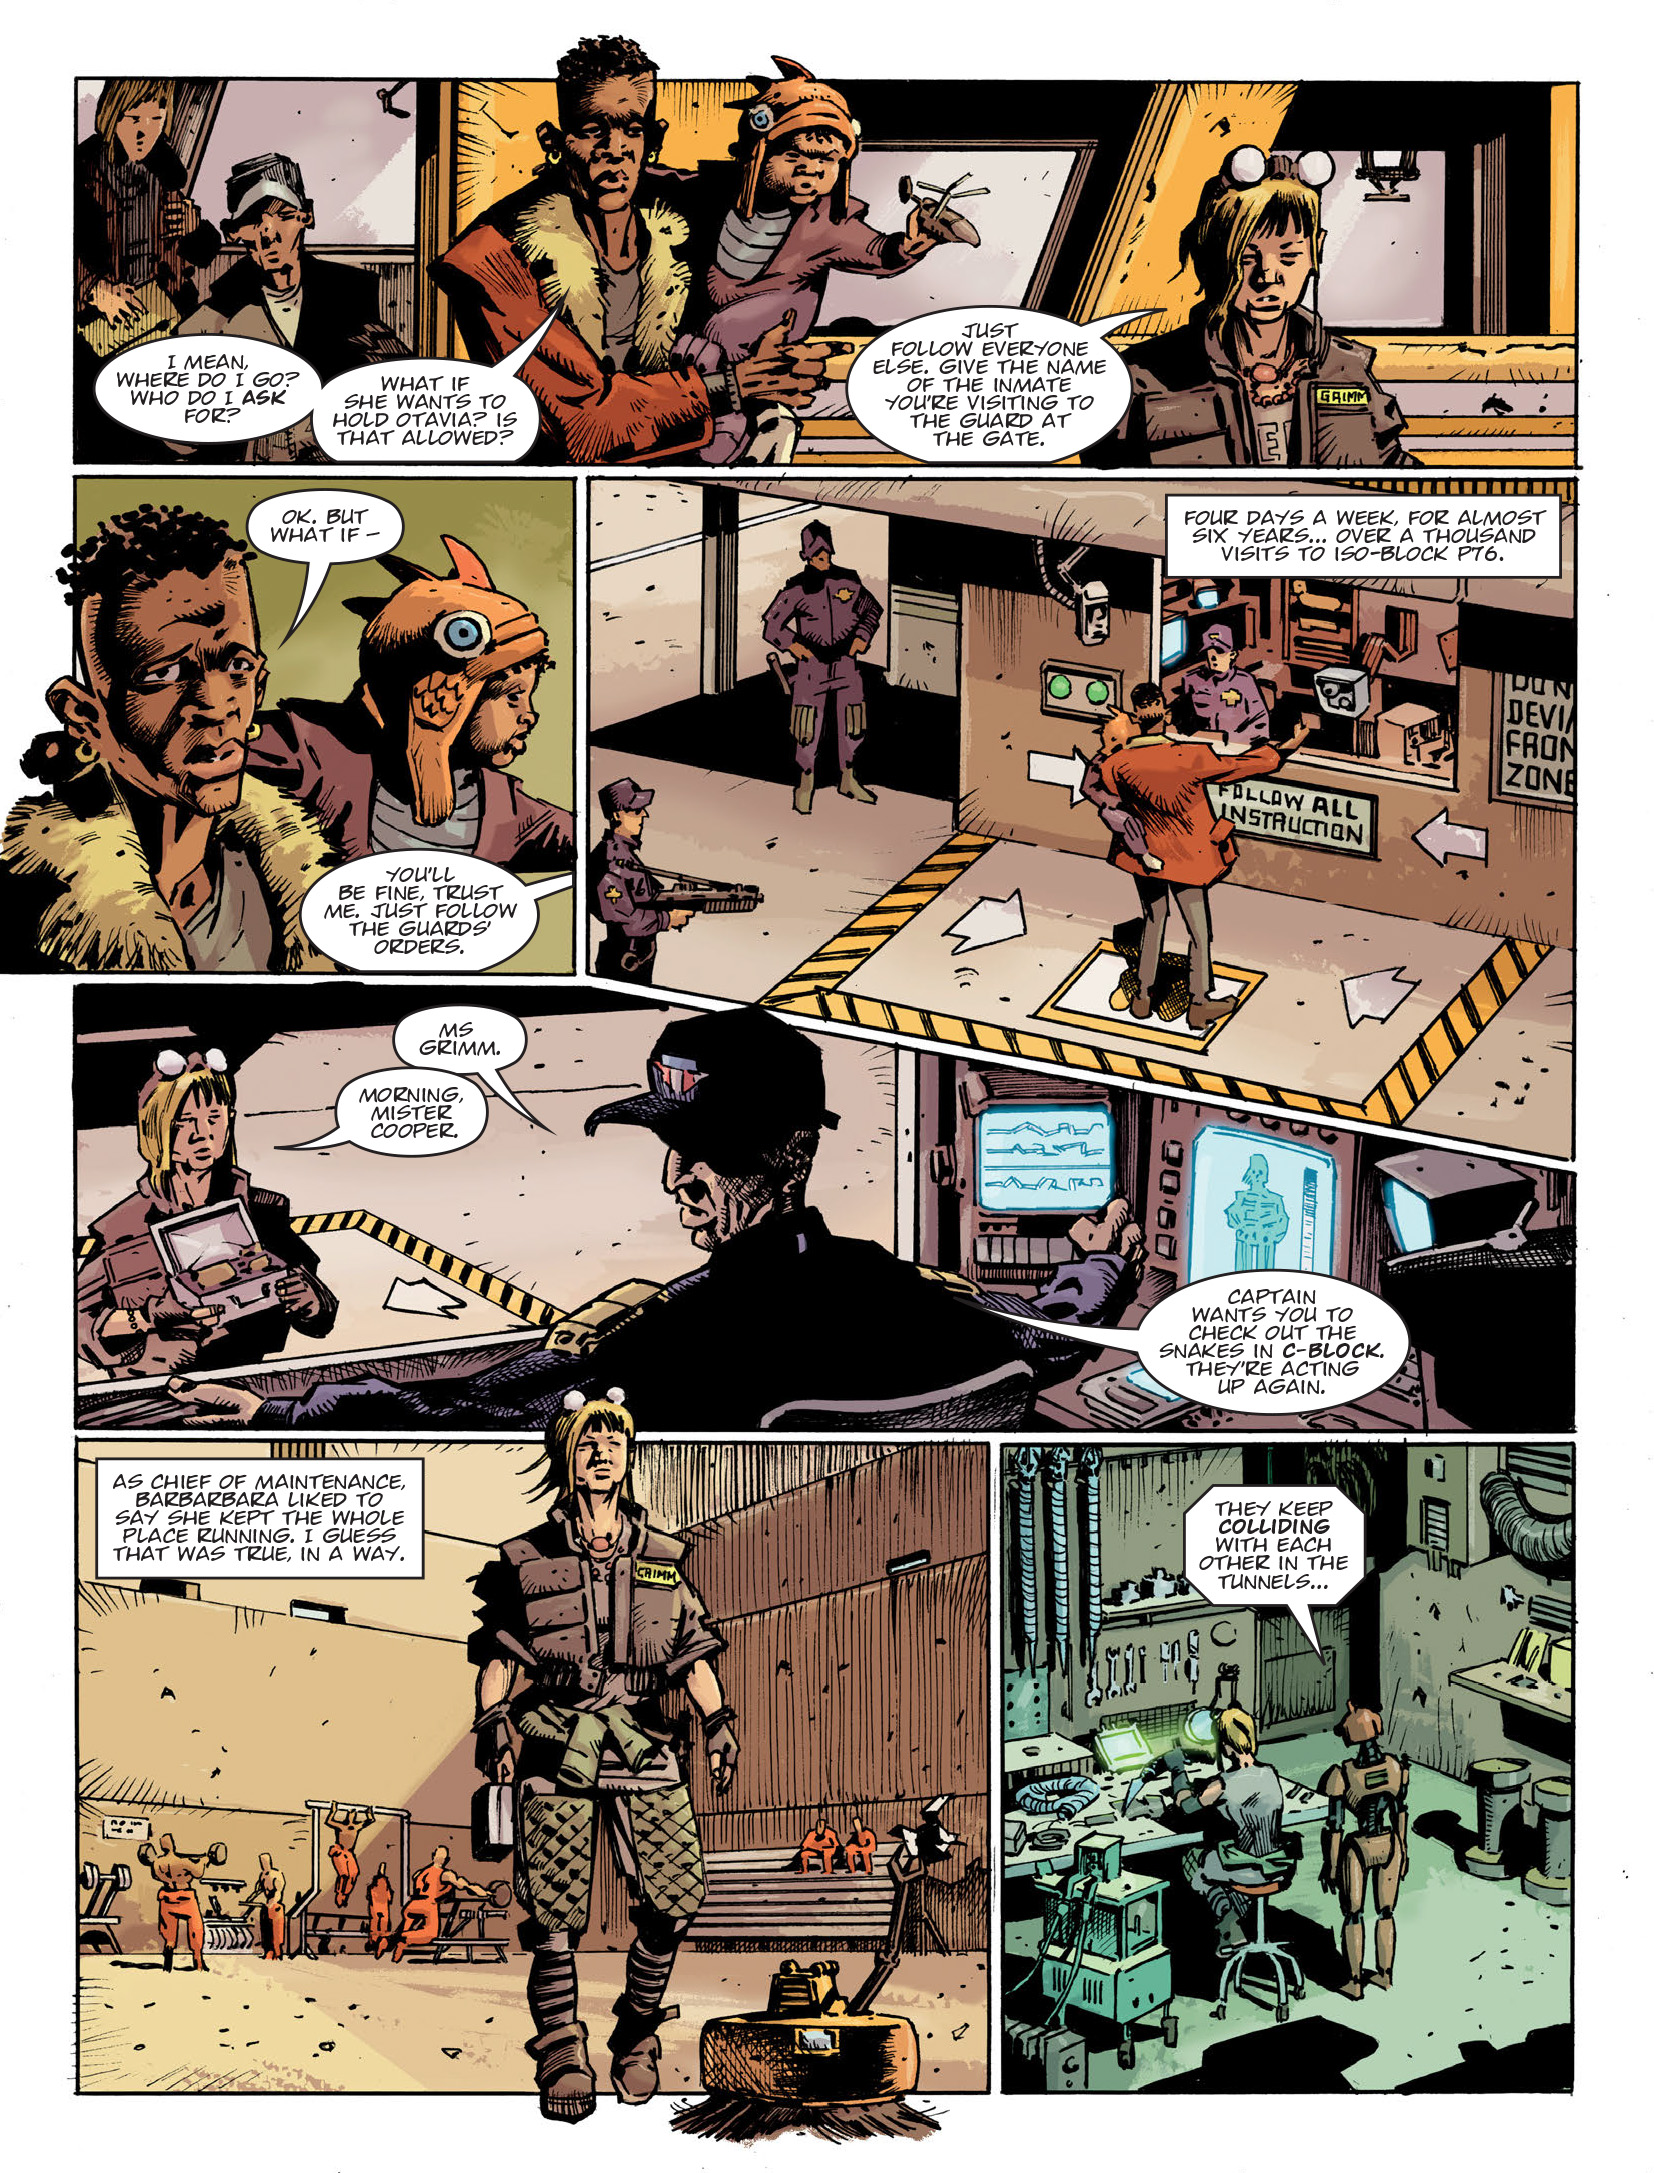 2000 AD: Chapter 2146 - Page 4